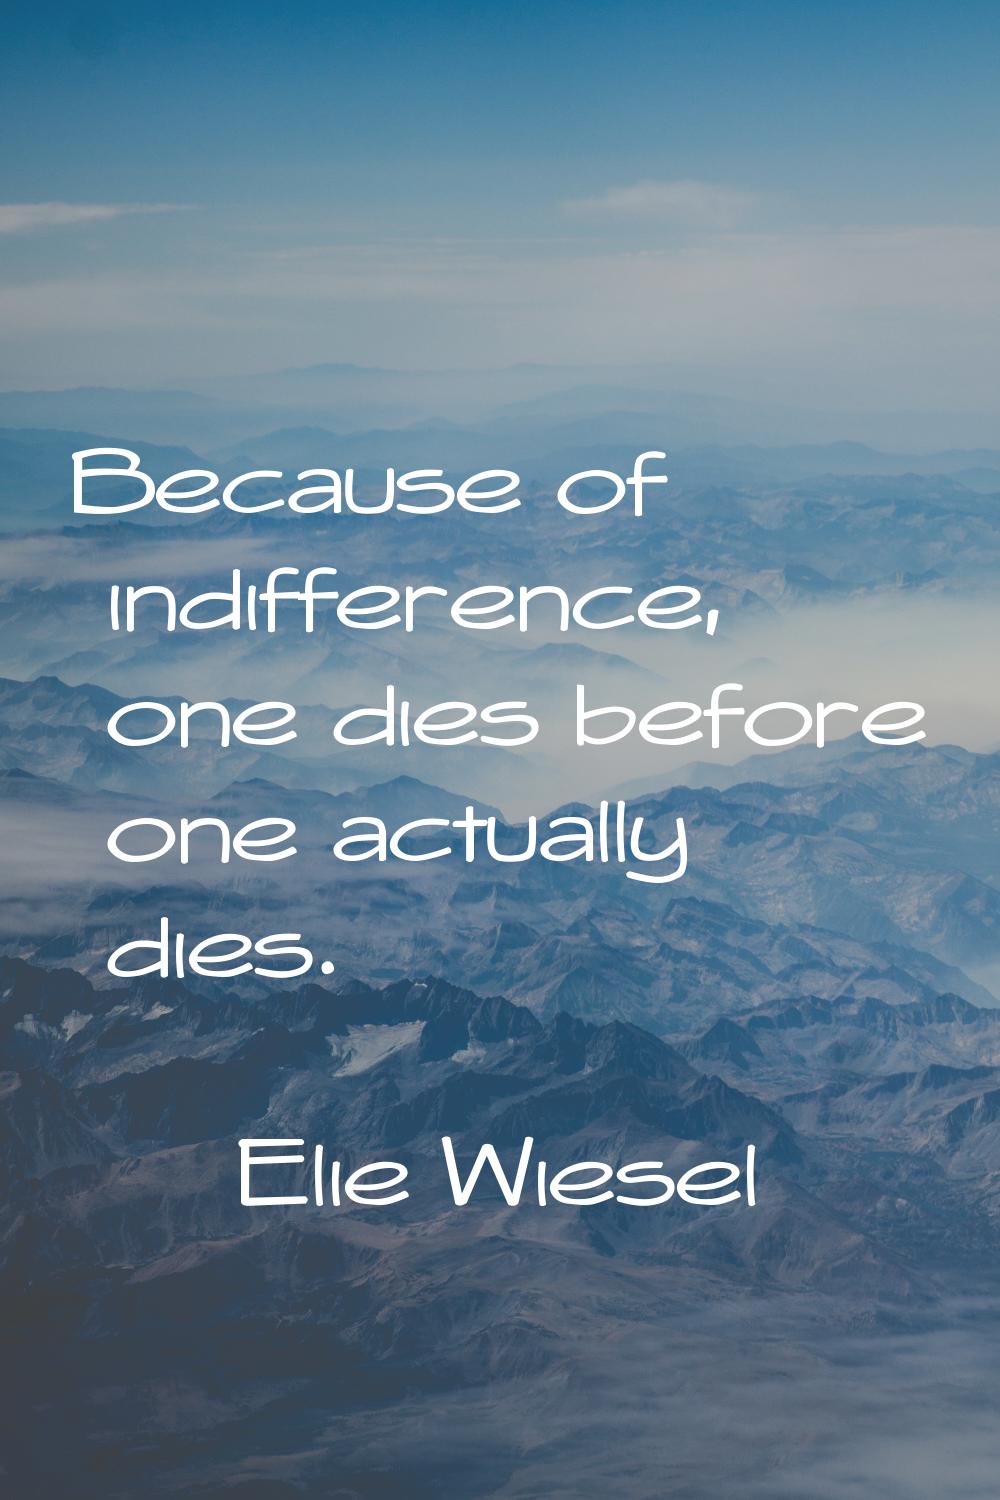 Because of indifference, one dies before one actually dies.